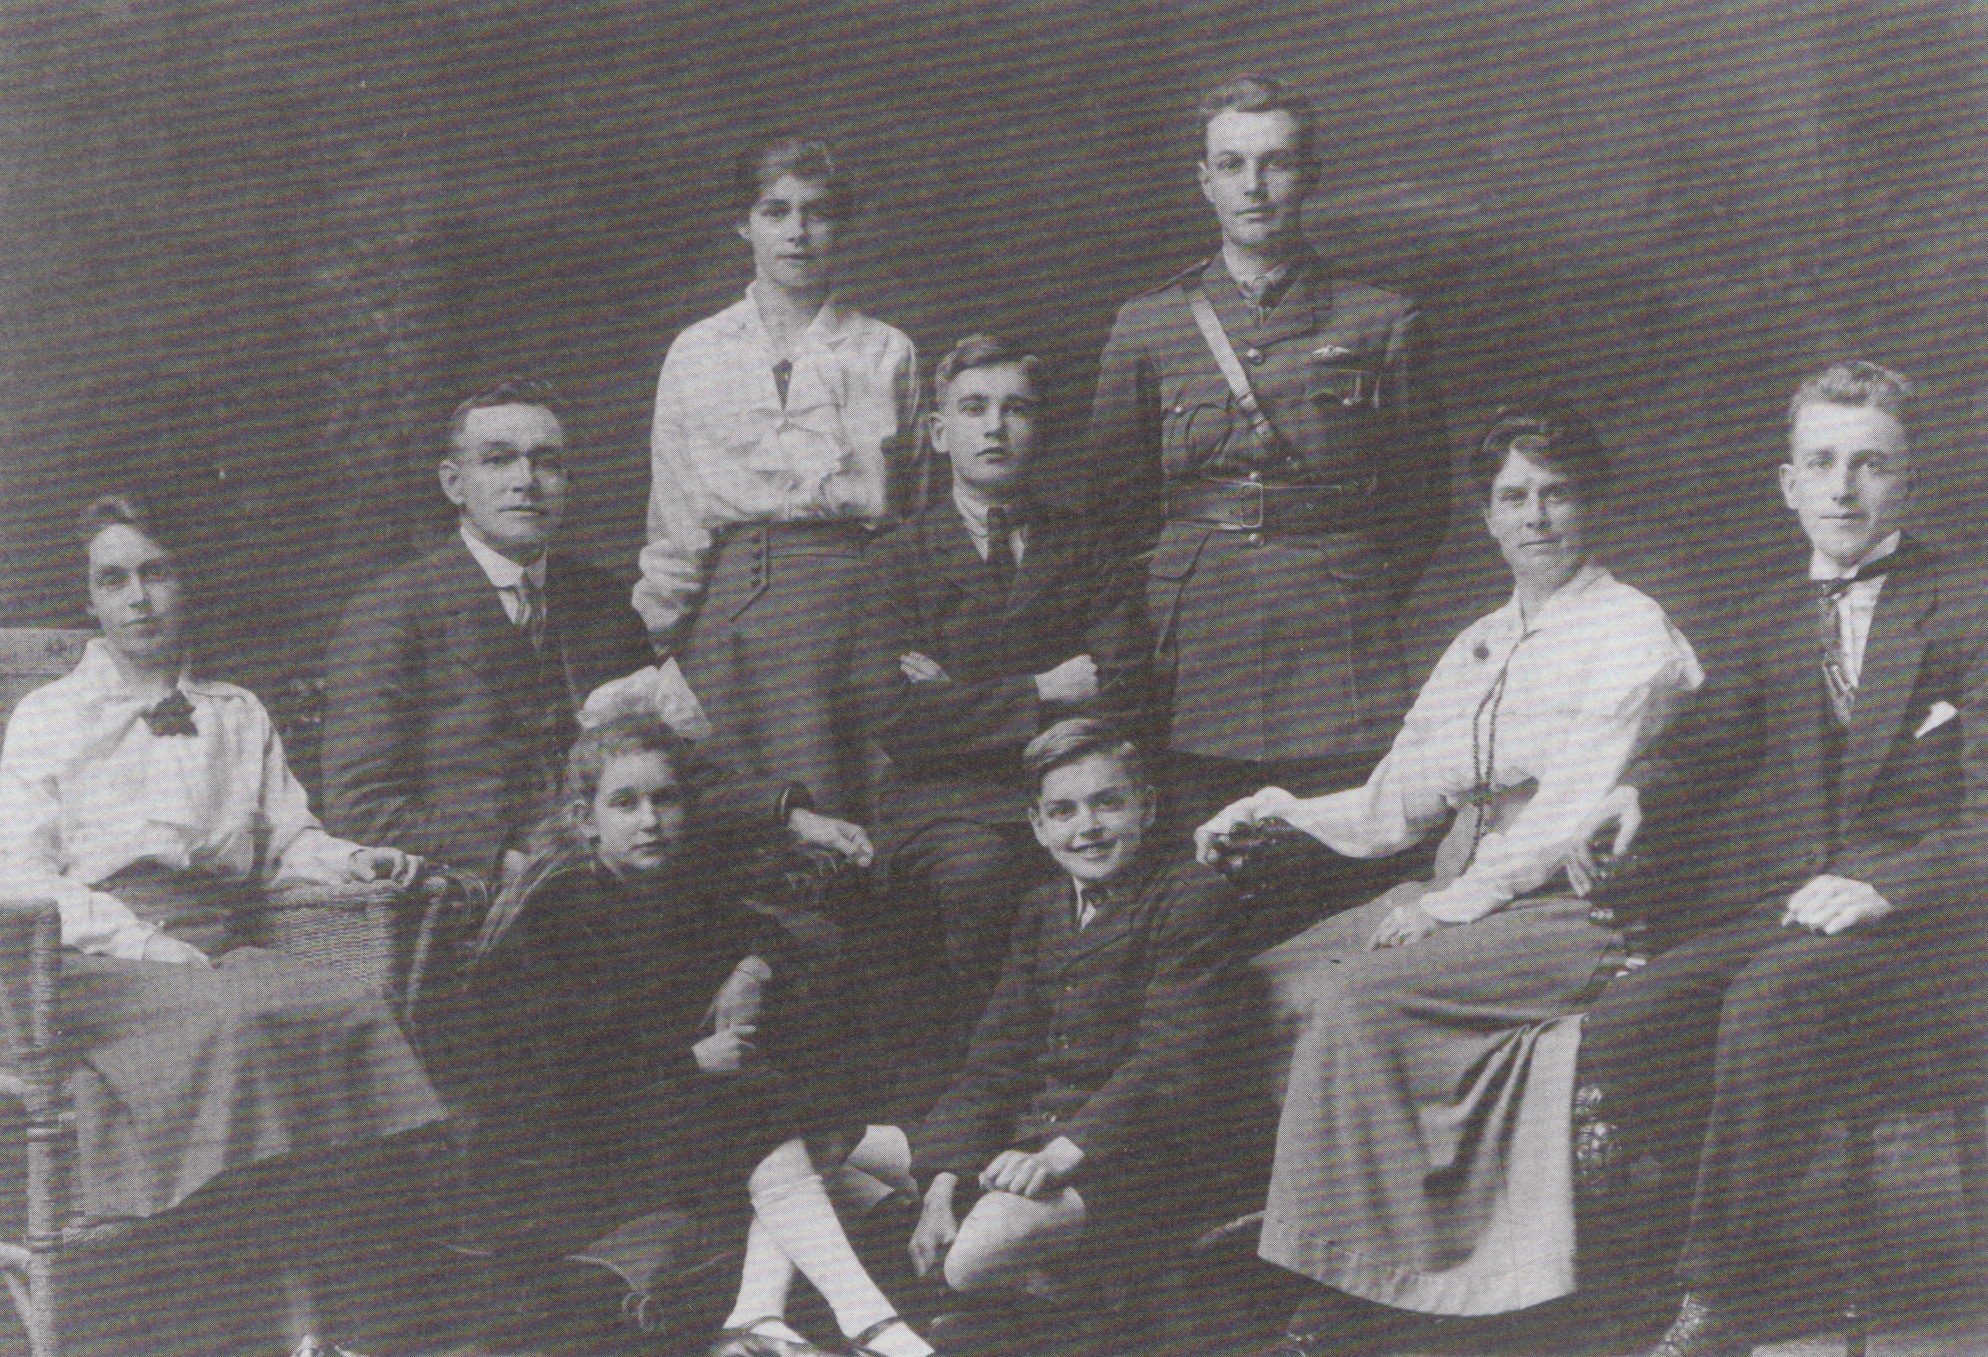 The Todd family in October,1917 before C.P. sails away to war.  He is standing in the back wearing his uniform. Sourced from: Enterprise and Energy: The Todd Family of New Zealand, written by Ross Galbreath